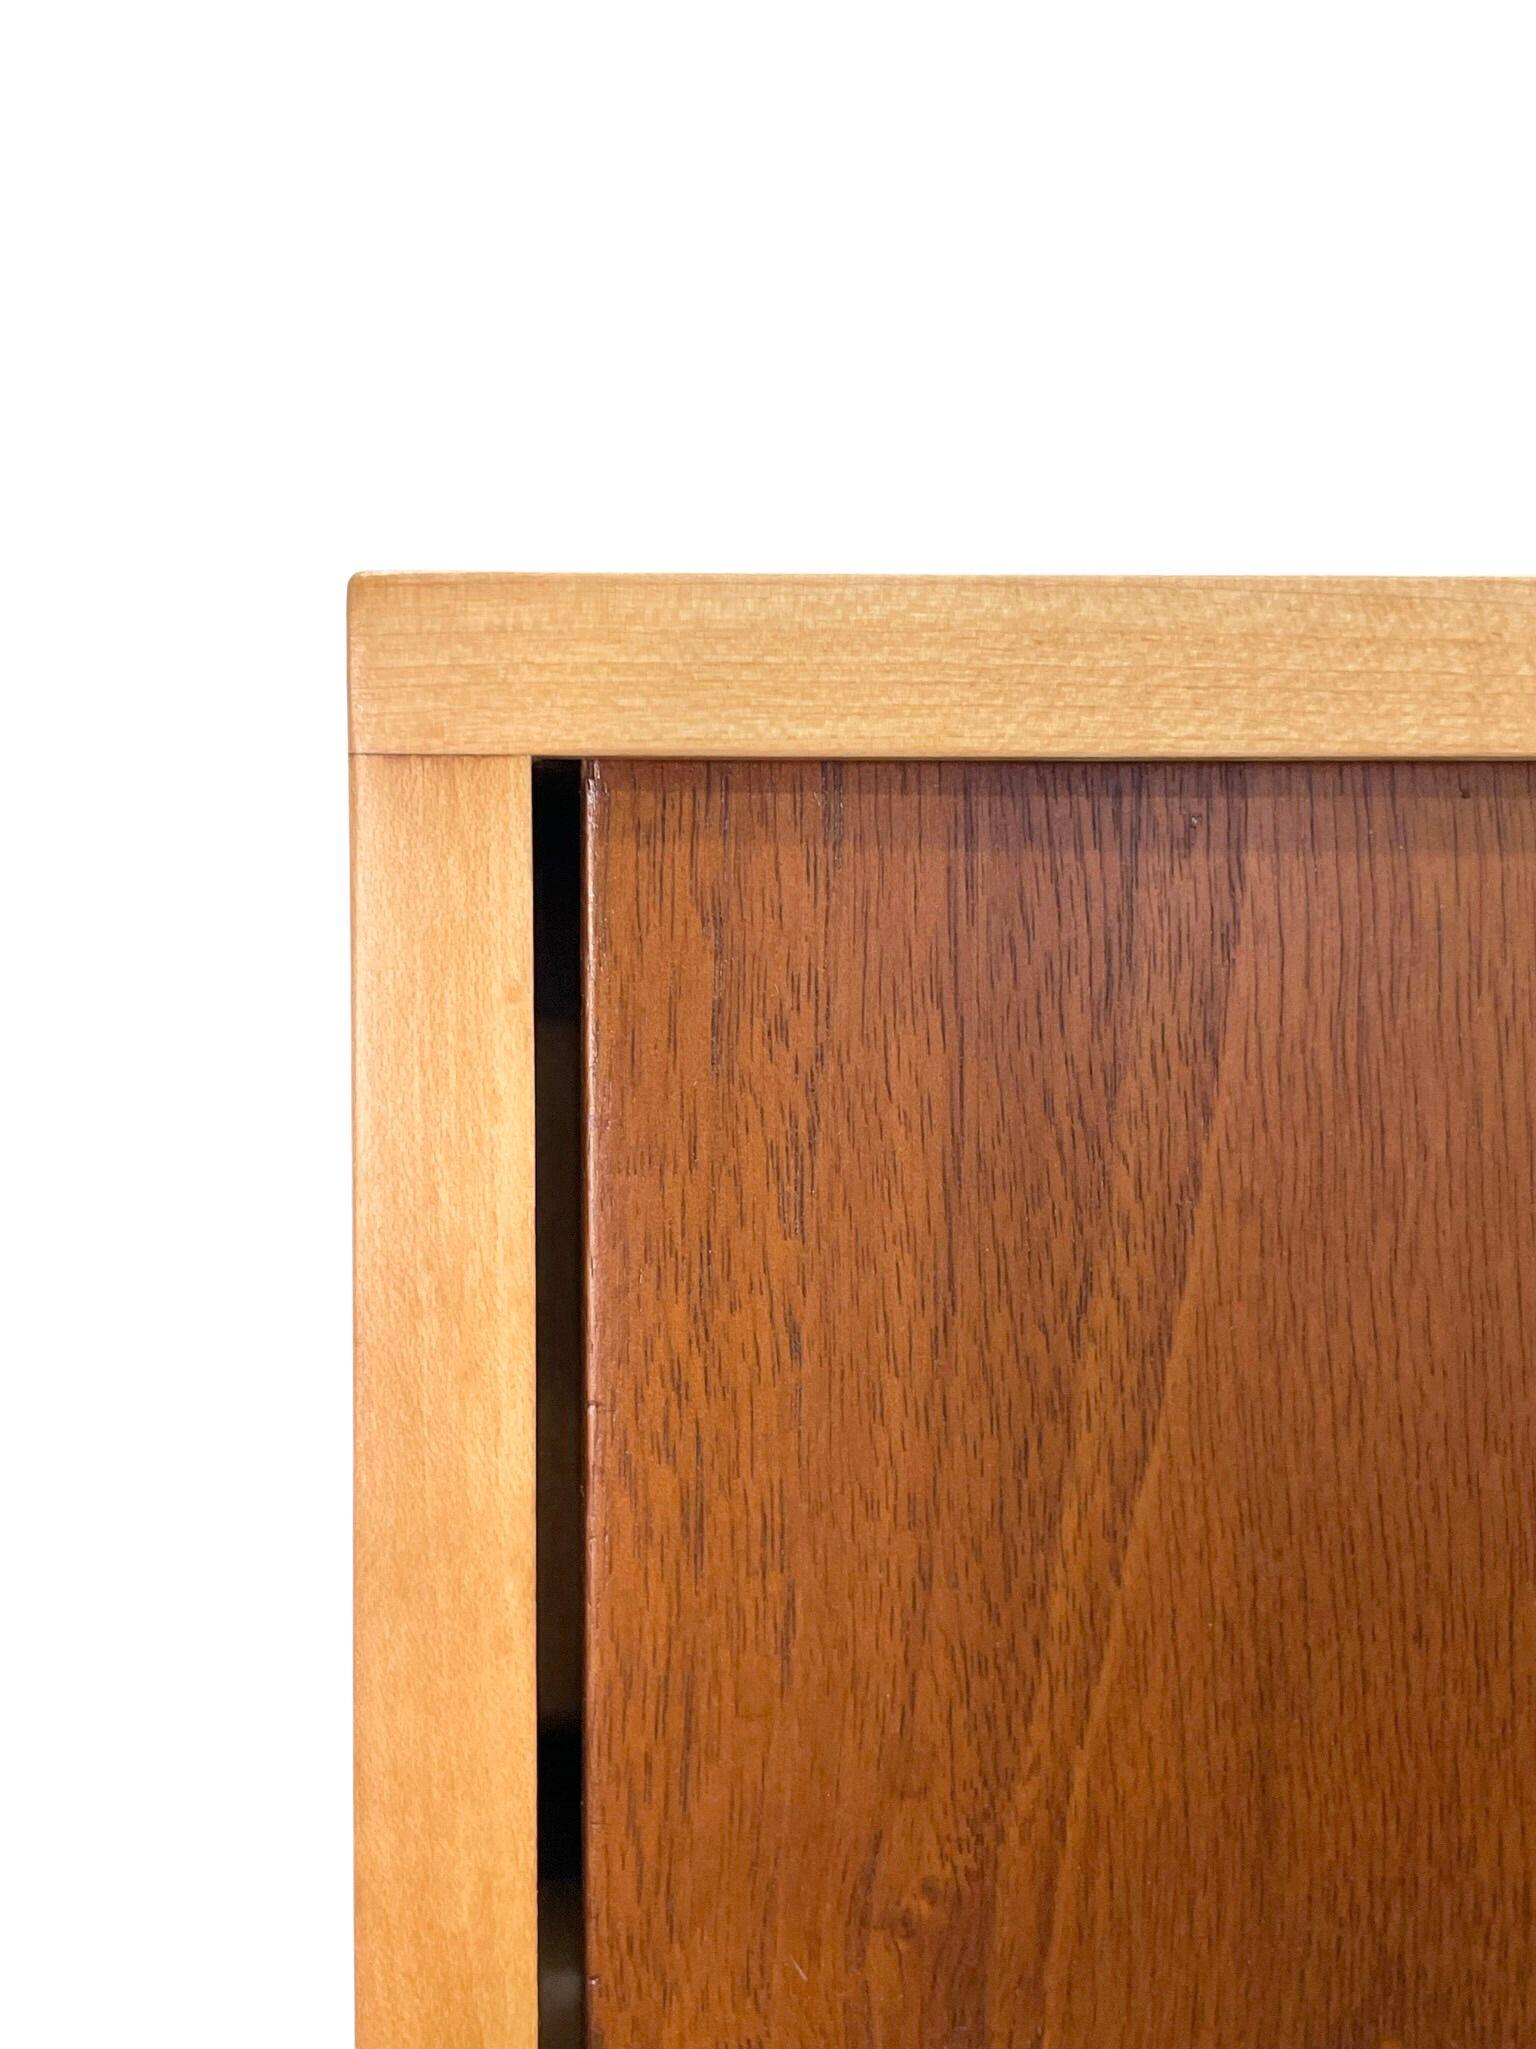 Wall Mounted Cabinet/Console by Finn Juhl for Baker, Teak and Maple 2